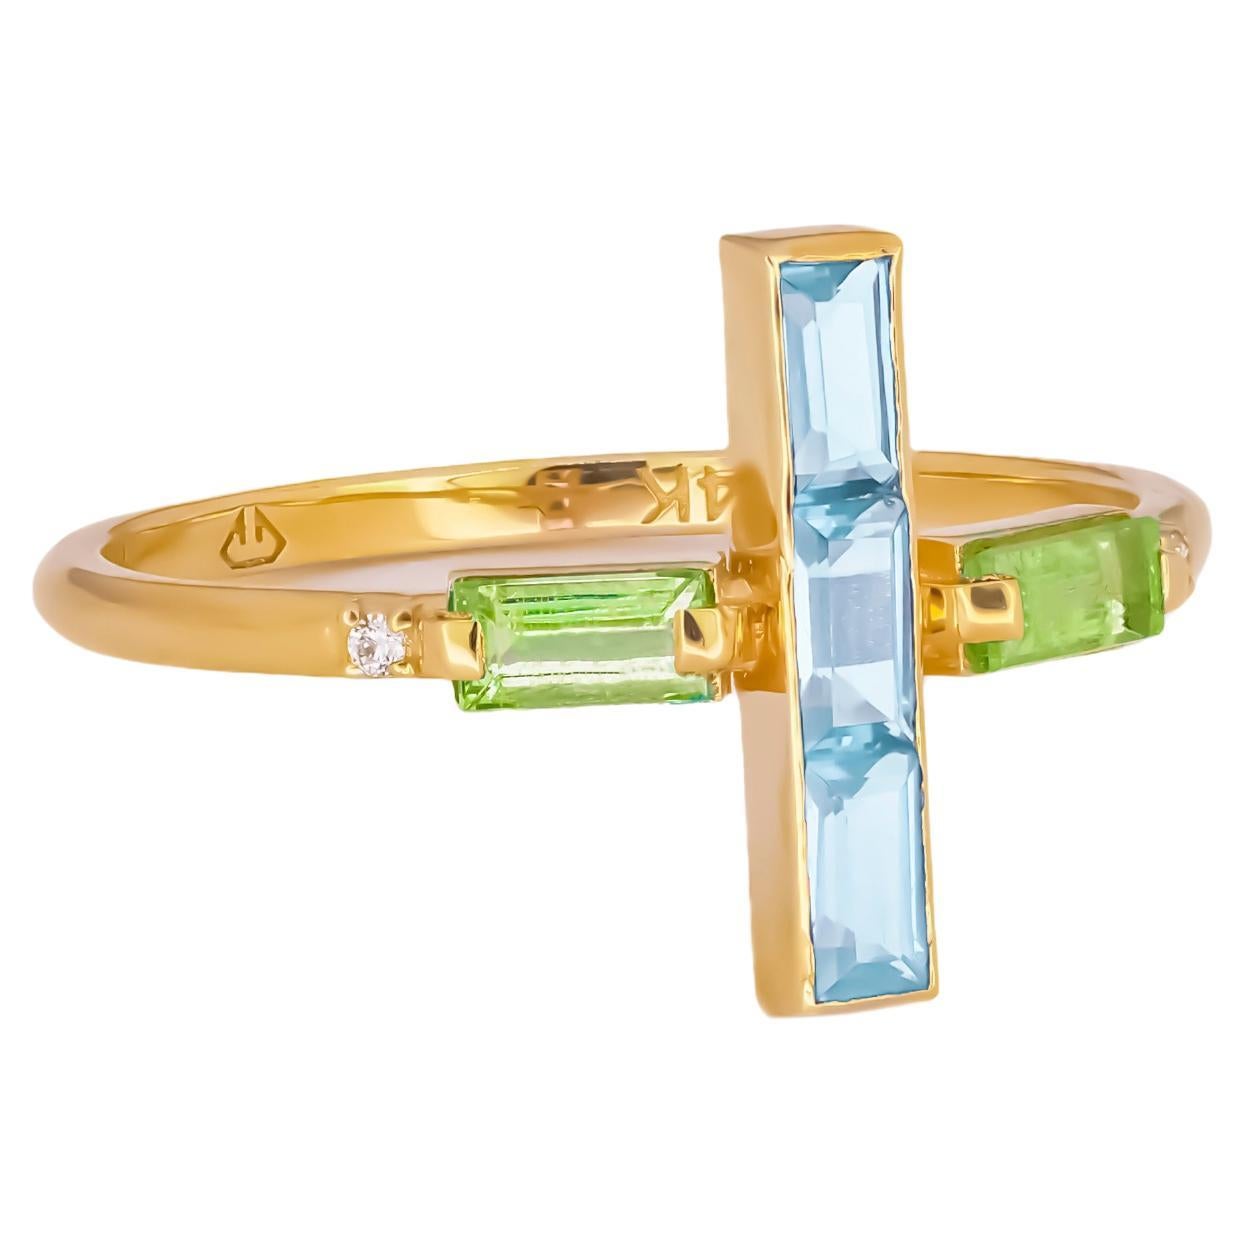 For Sale:  Topaz and peridot 14k gold ring.